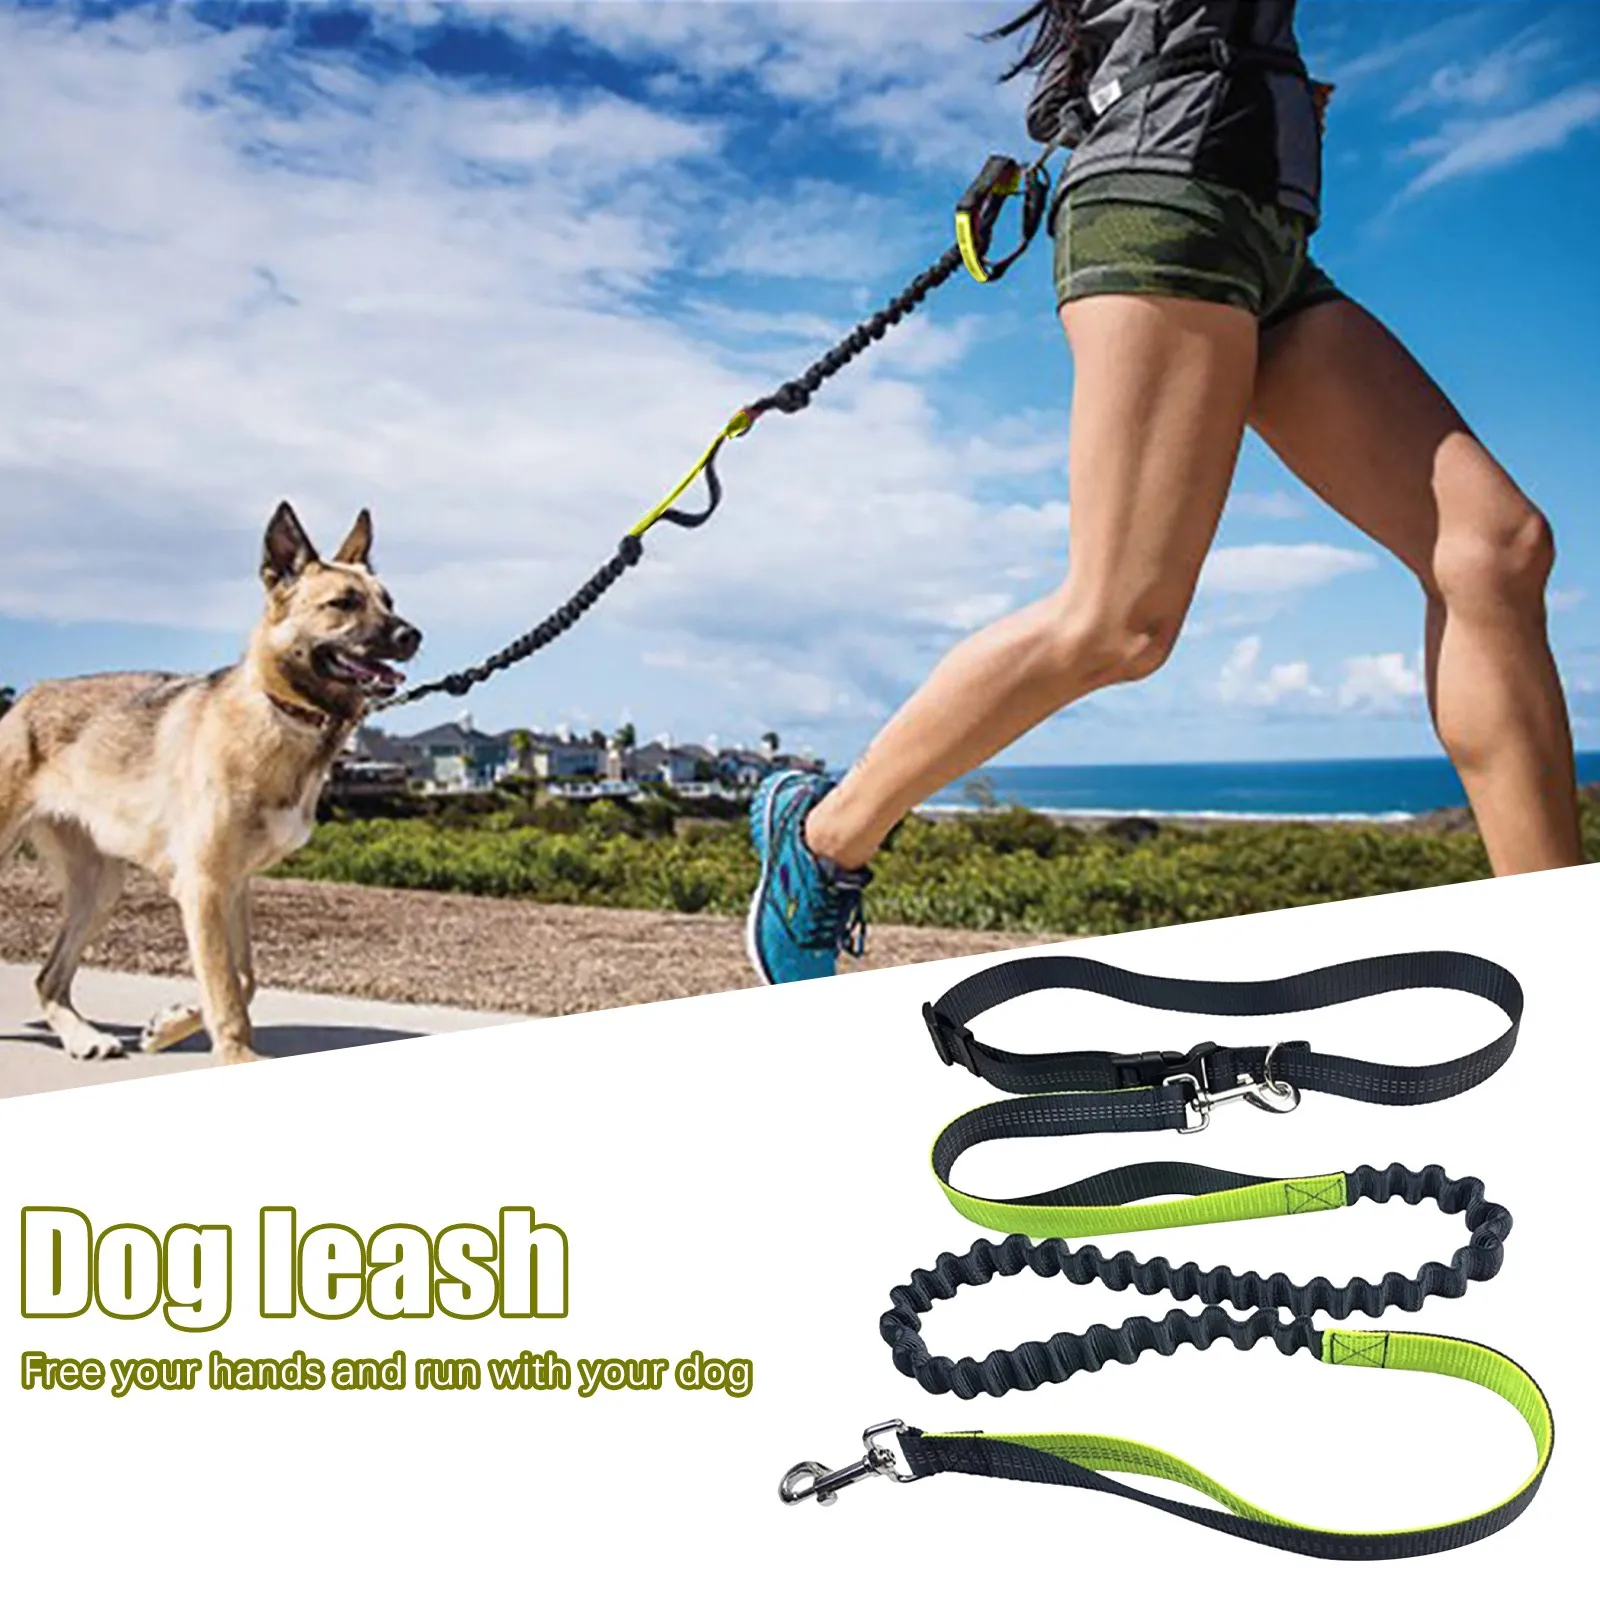 Hands Pets Dog Leash Traction Rope for Running Jogging Walking Hiking Reflective 